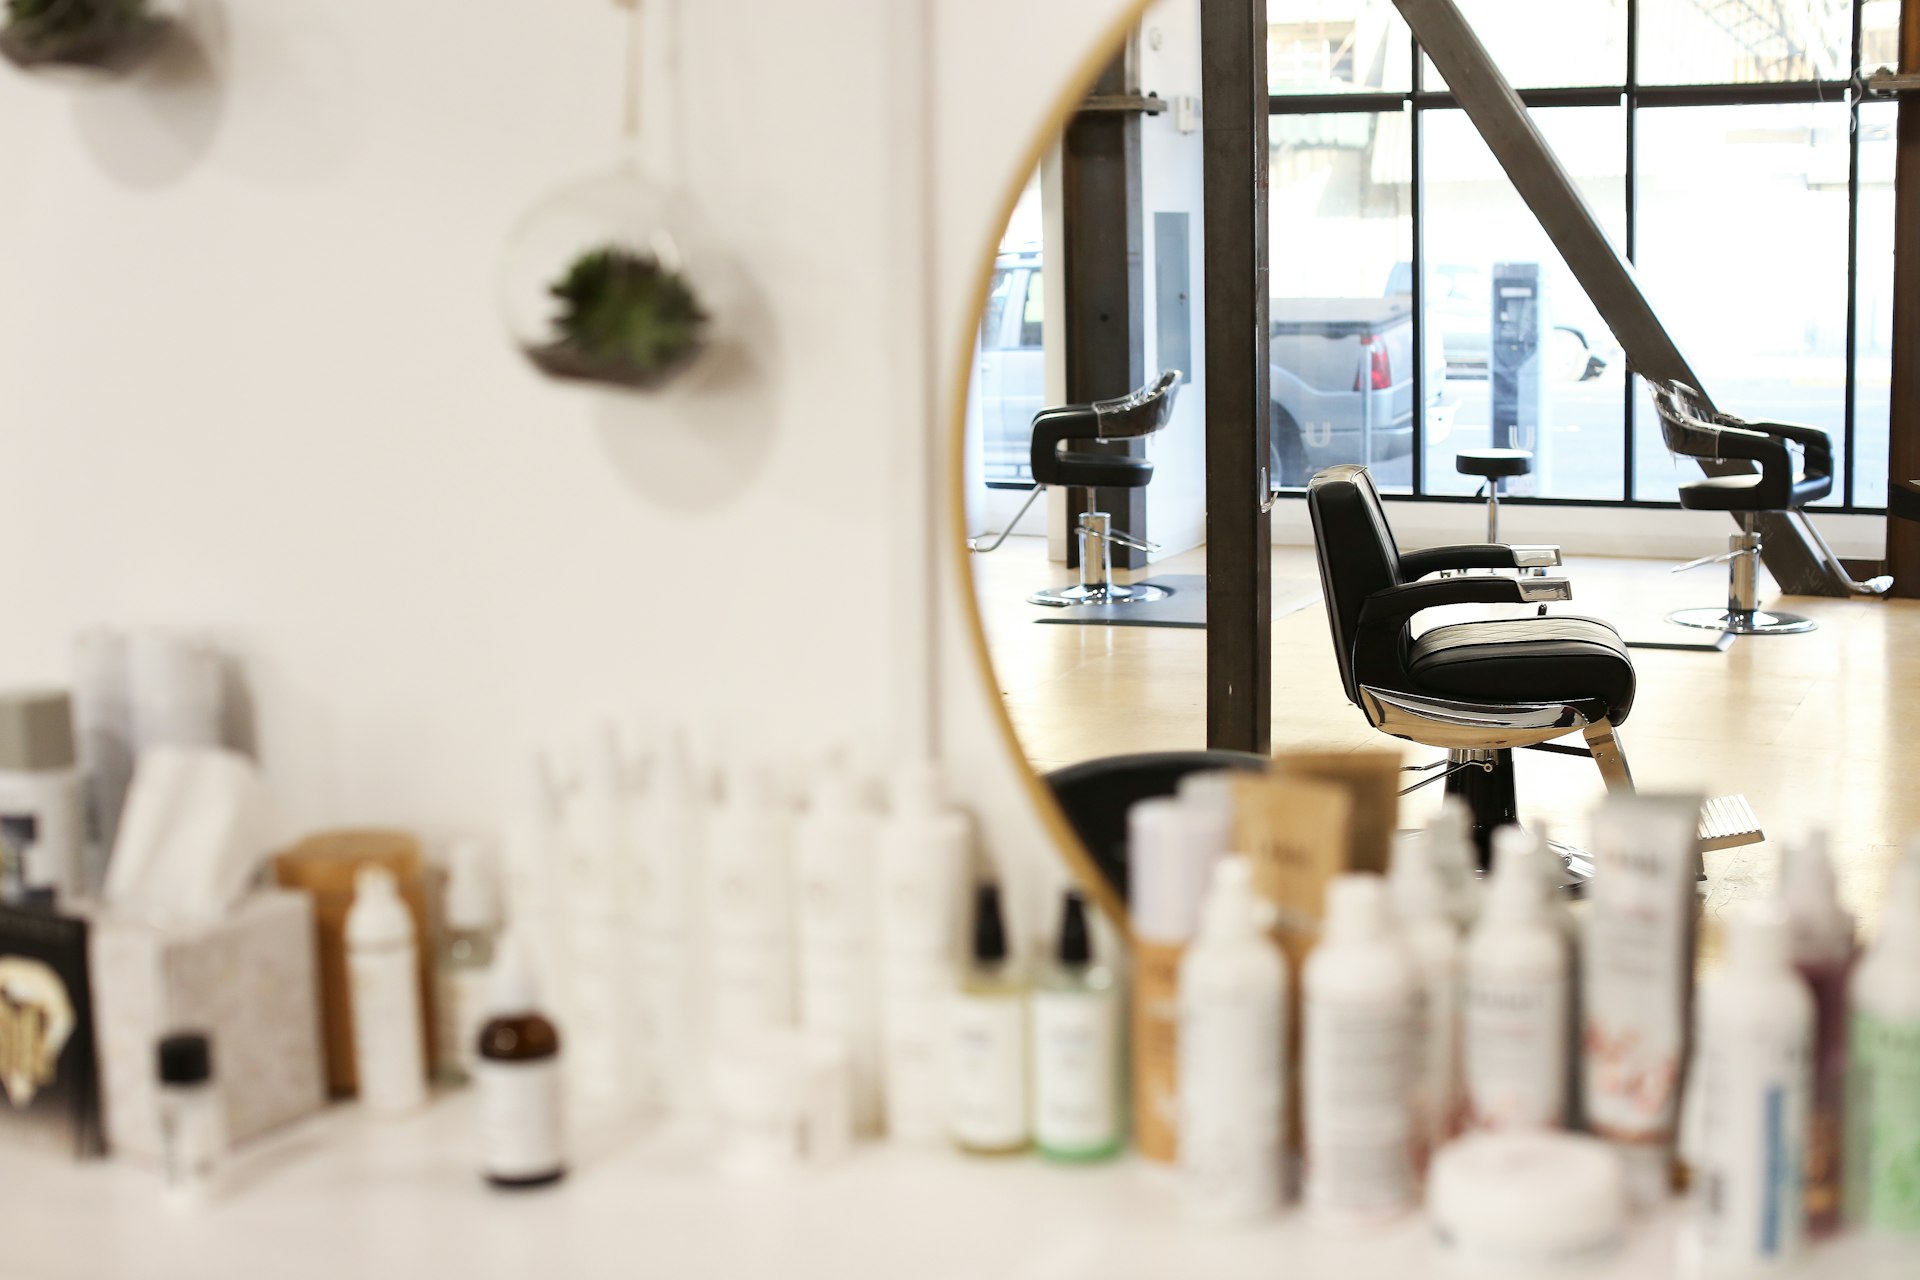 Image of a hair salon with a large mirror and lots of bottles of hair products